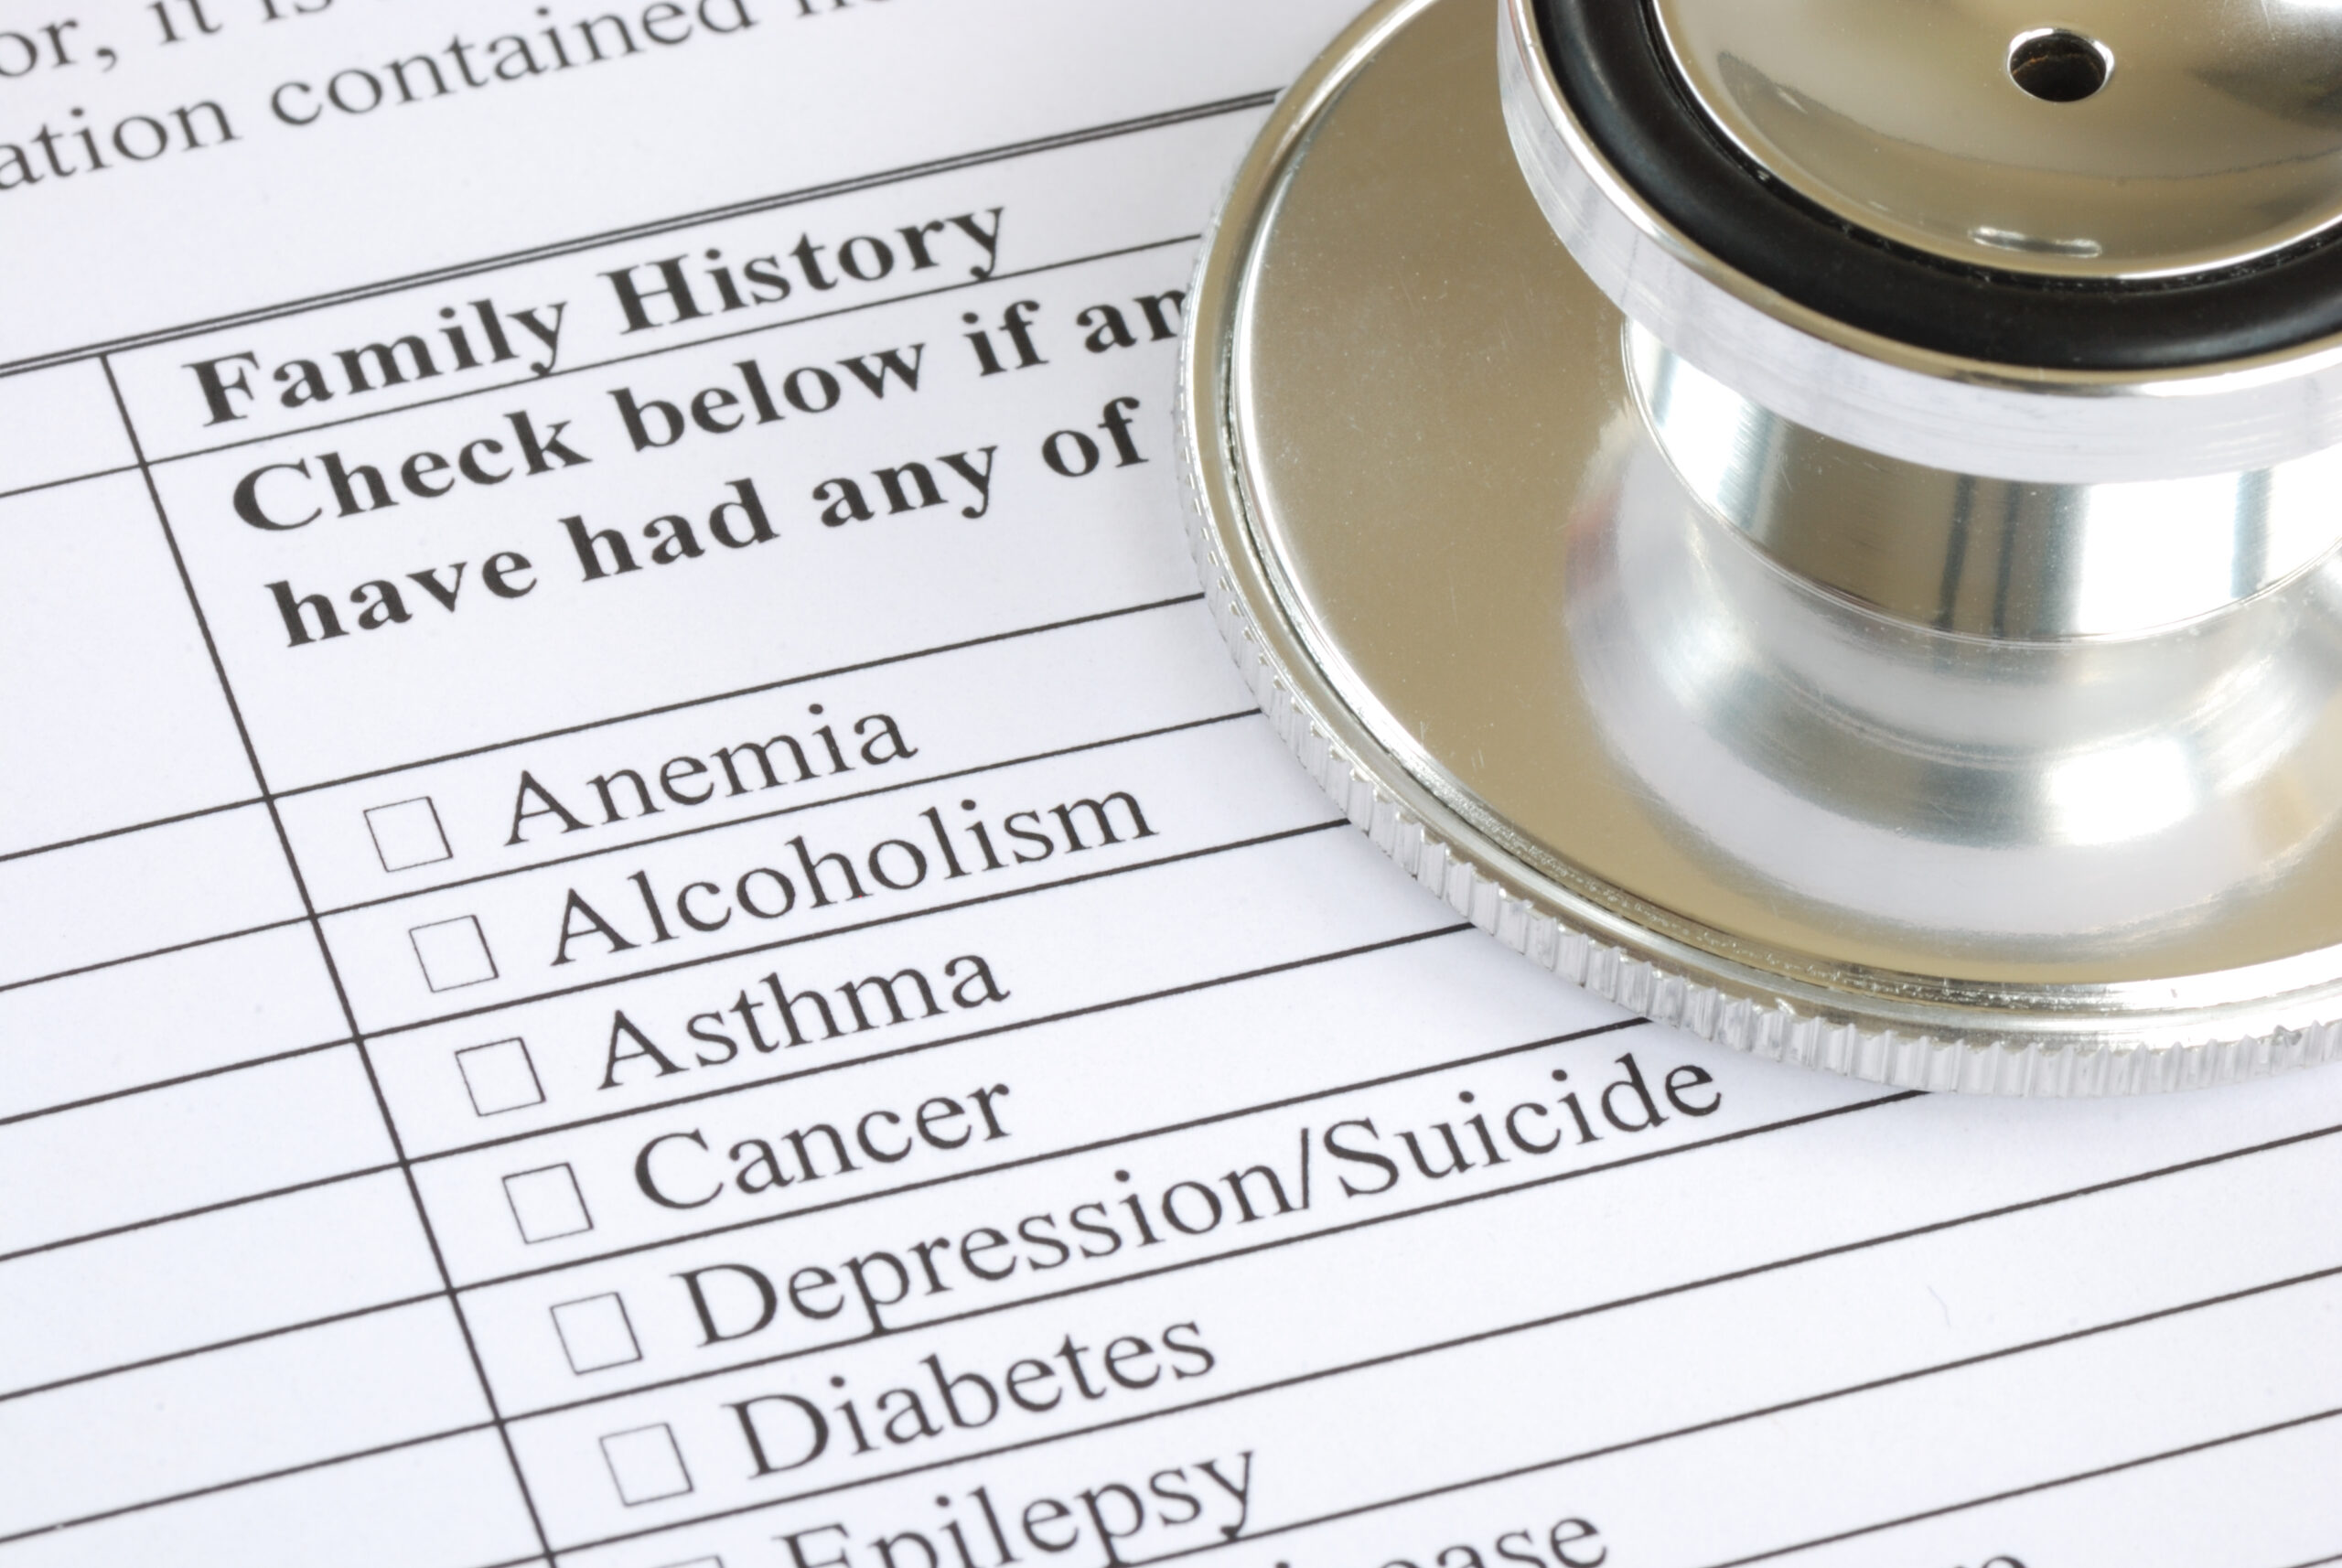  family history section in the medical questionnaire